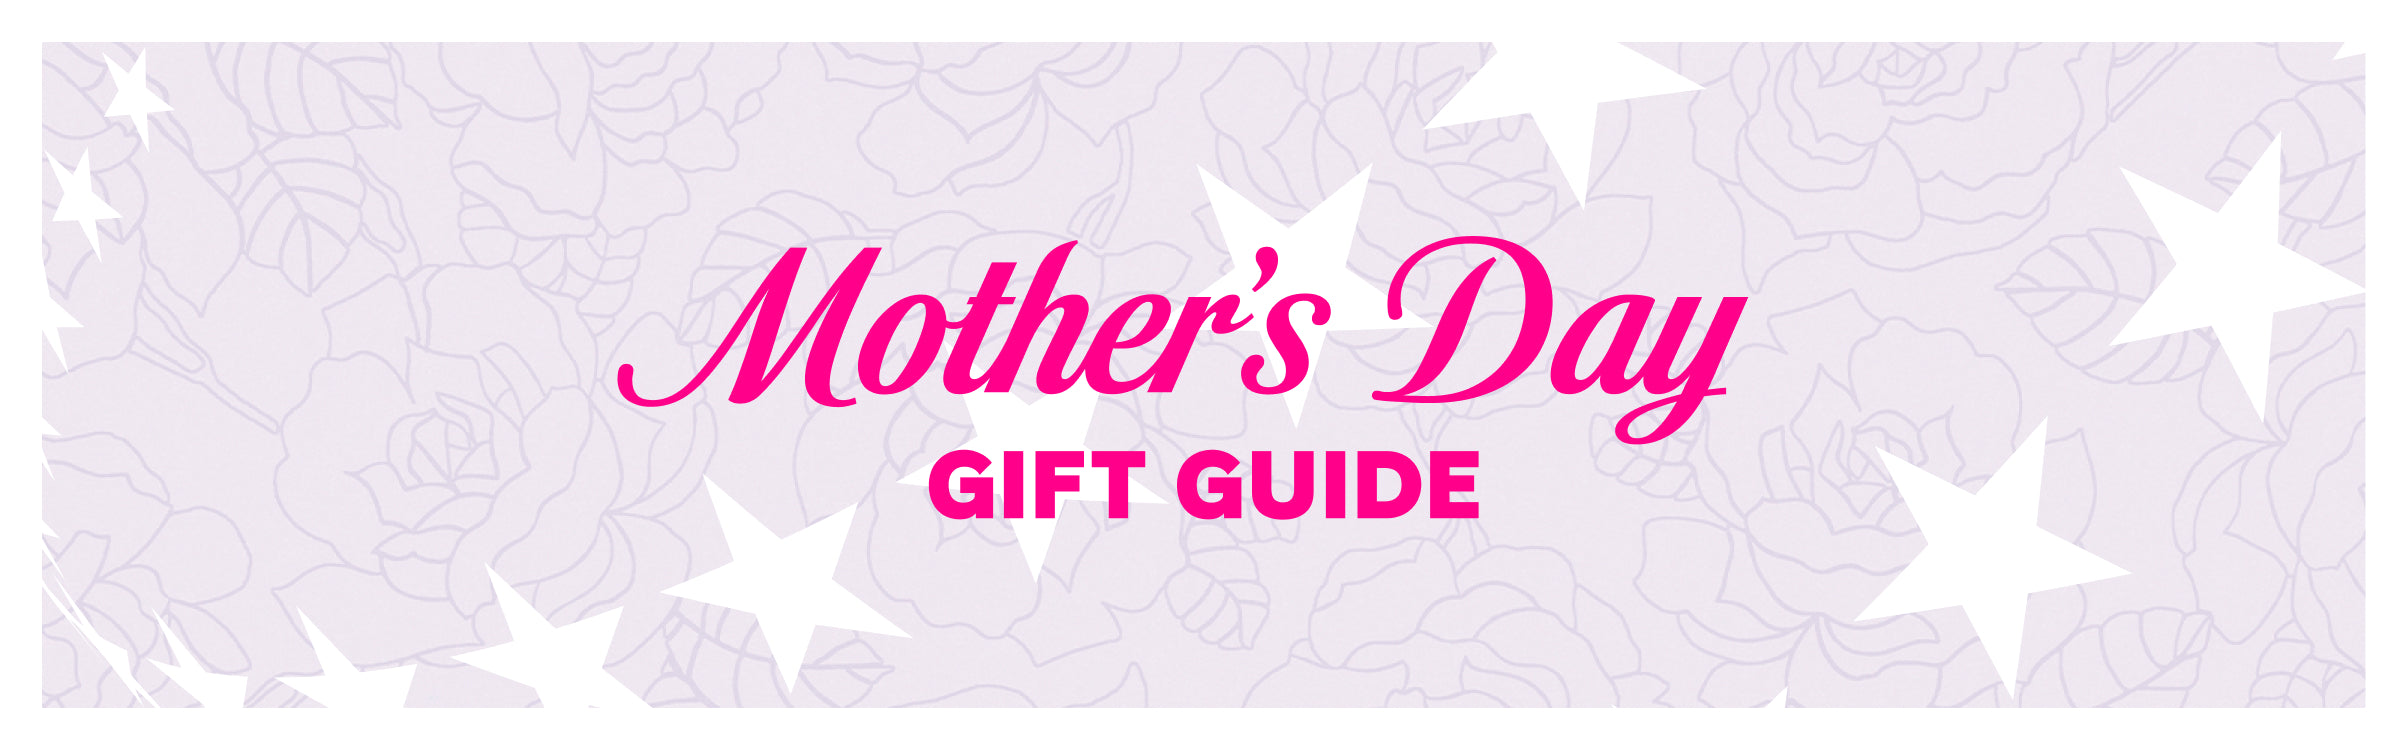 premium-banner-mother's day gift guide